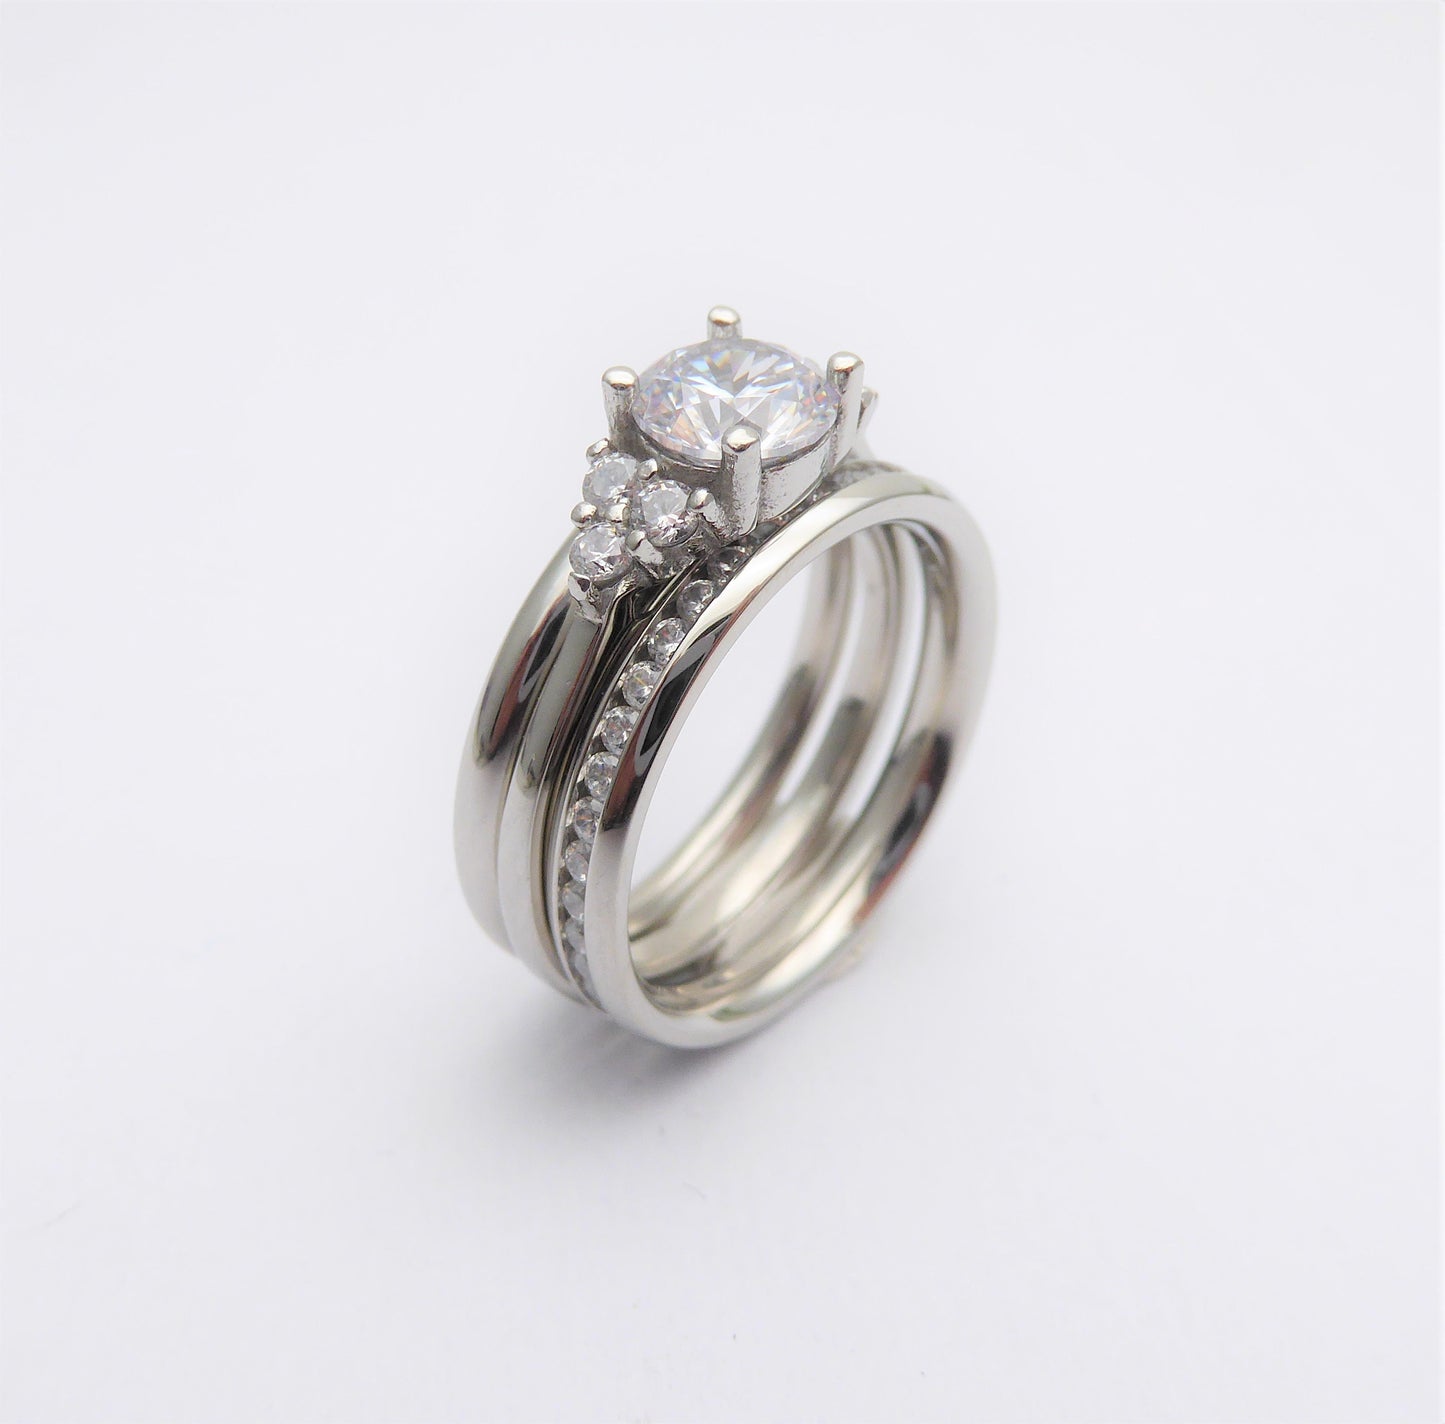 Wedding set! Man Made White Sapphire engagment ring and matching eternity & Wedding ring in Titanium or White Gold